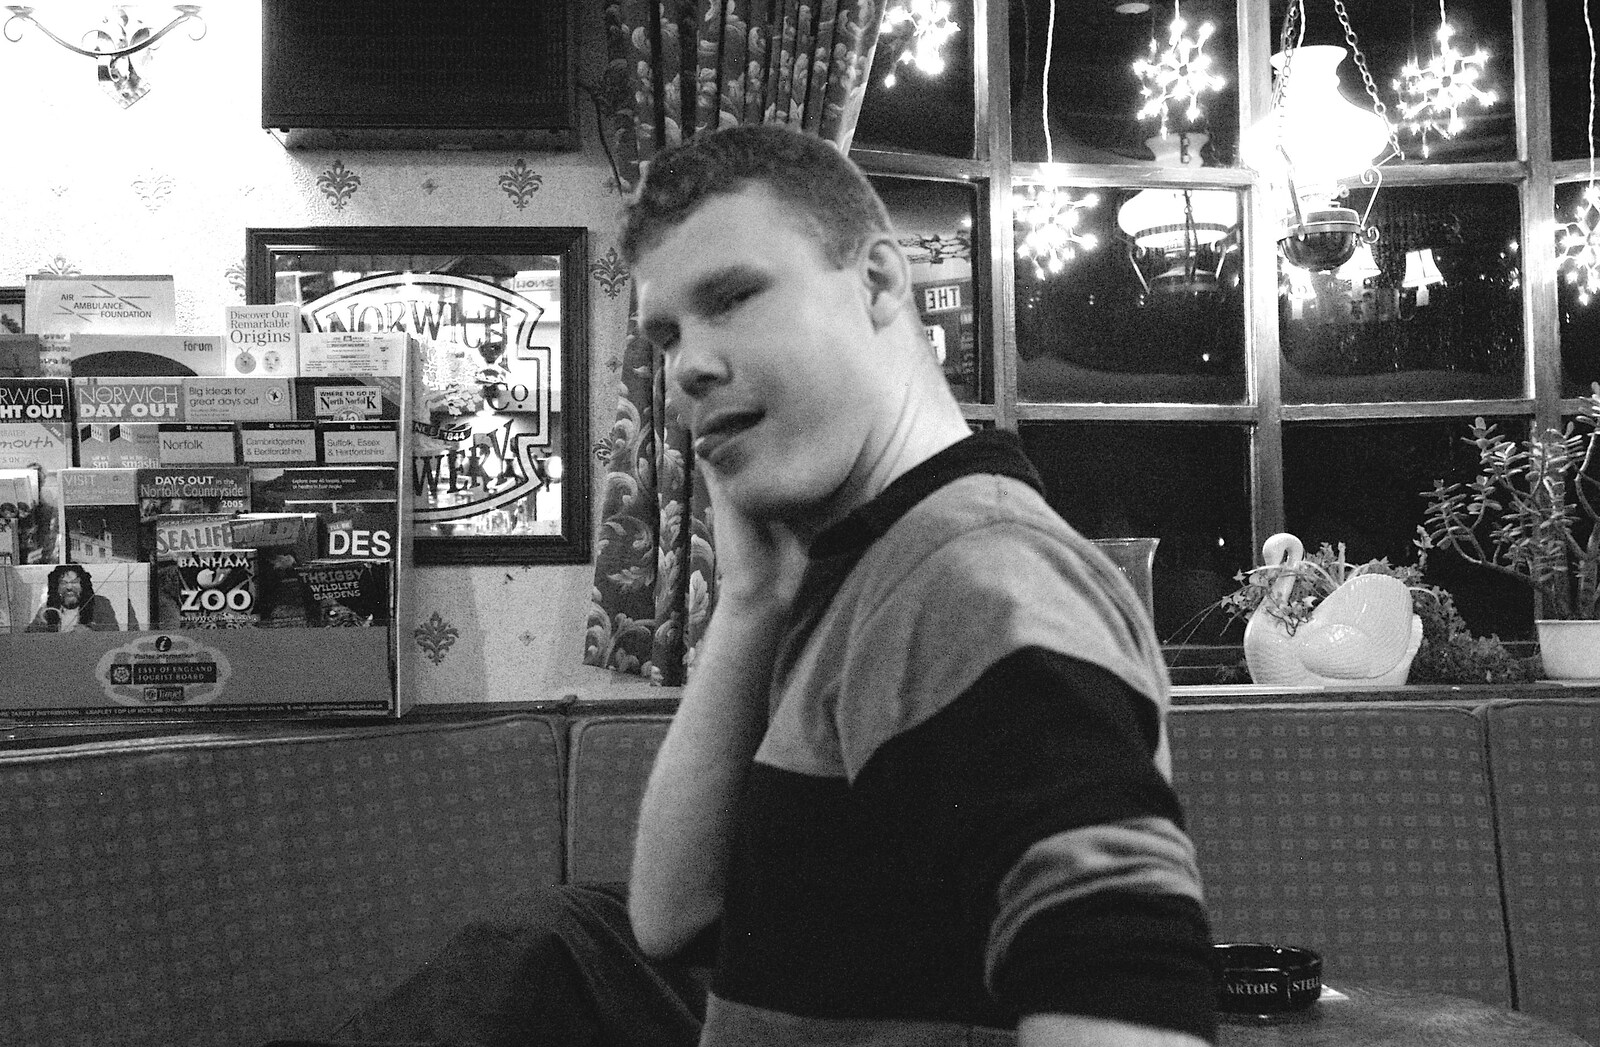 Mikey-P does some posing from Pre-Christmas Roundup: Wigs, Beers and Kebabs, Diss, Norfolk - 24th December 2005